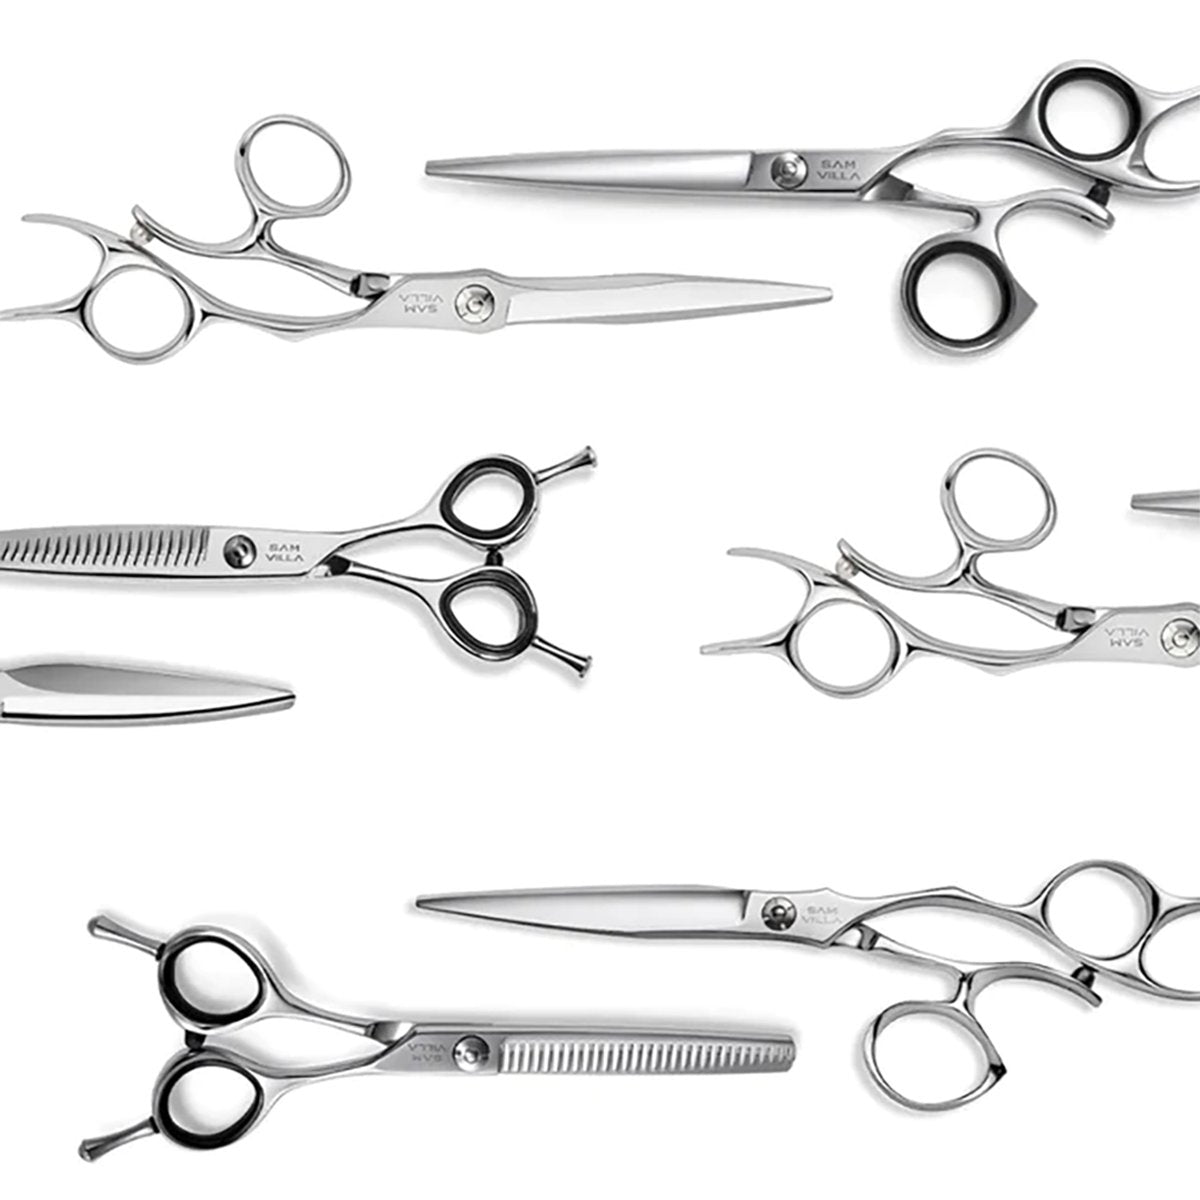 How To Choose The Best Professional Hair Cutting Shears